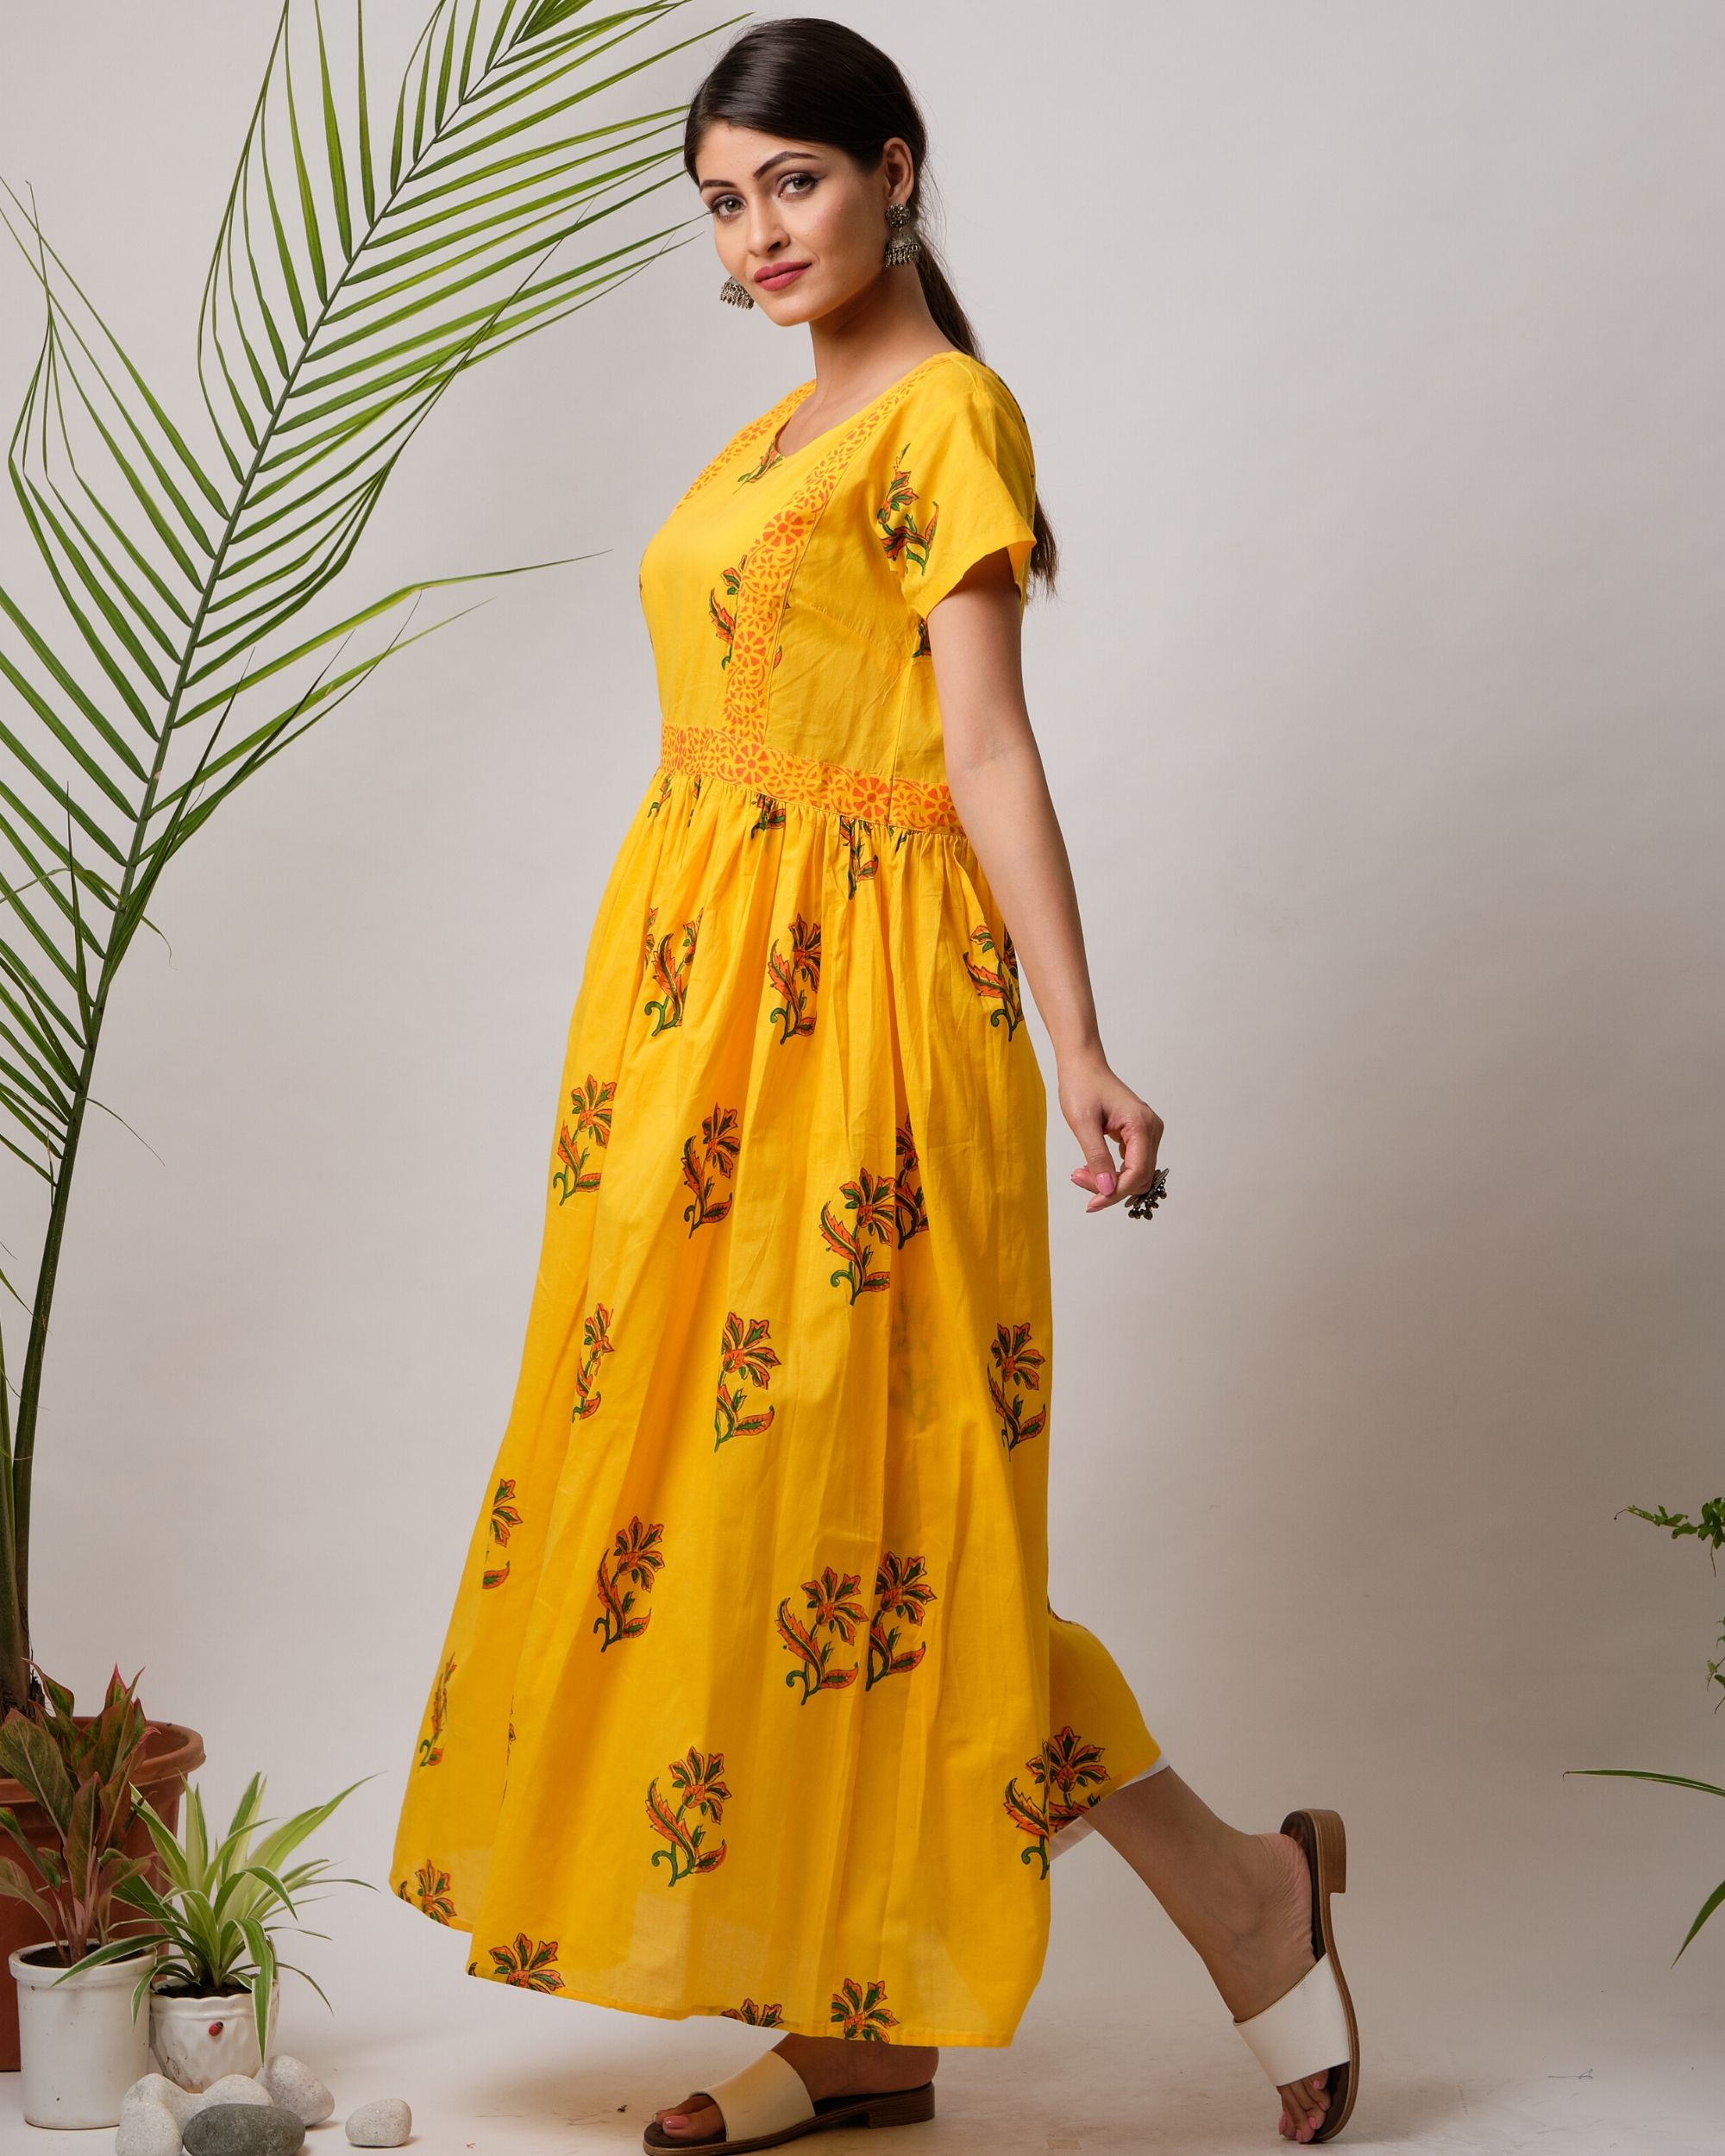 Mustard yellow floral gathered dress by Free Living | The Secret Label